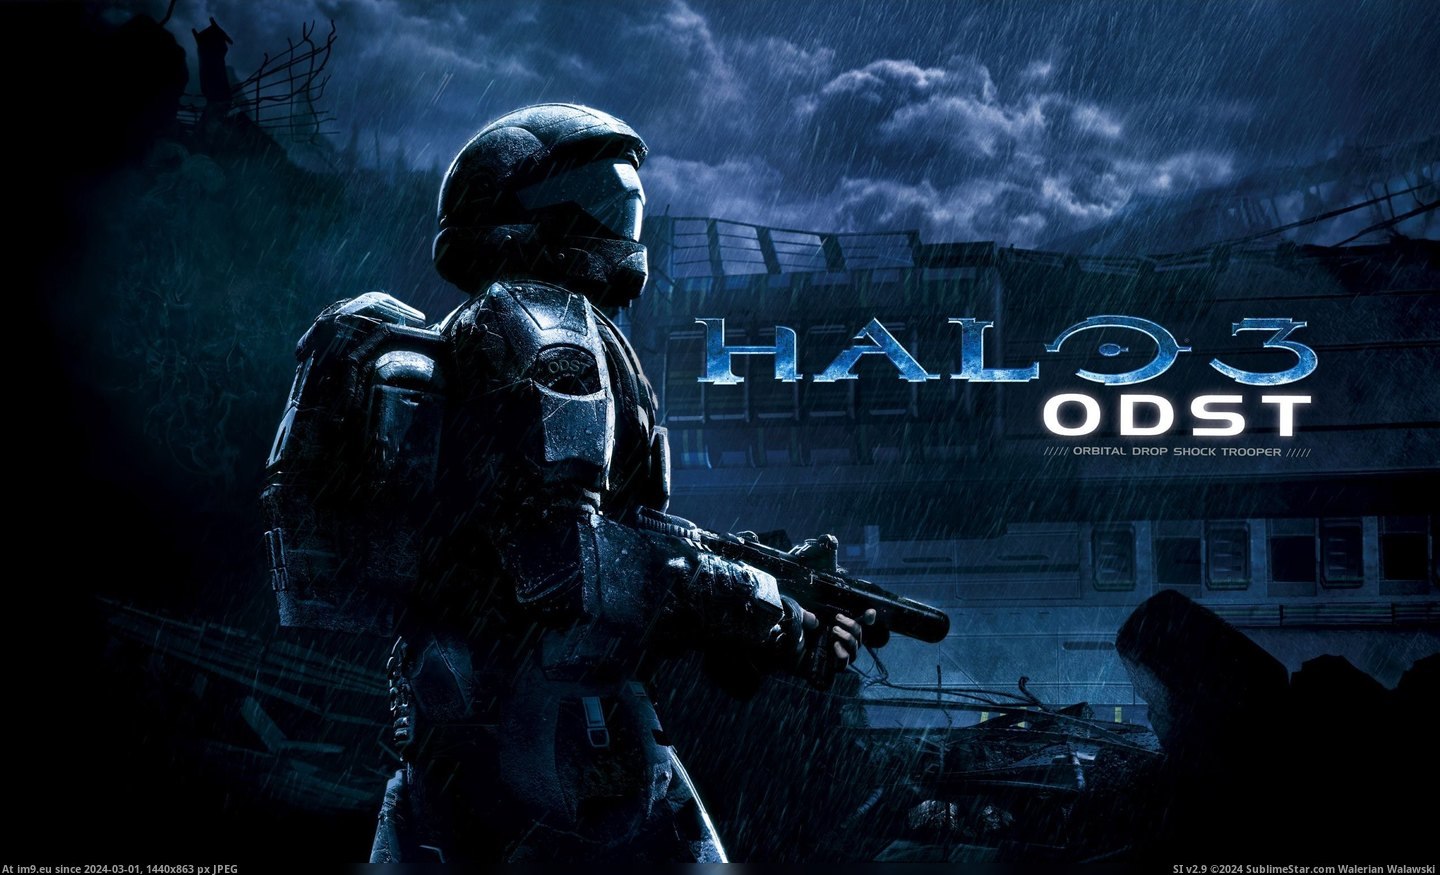 #Game #Halo #Video Video Game Halo 75123 Pic. (Obraz z album Games Wallpapers))